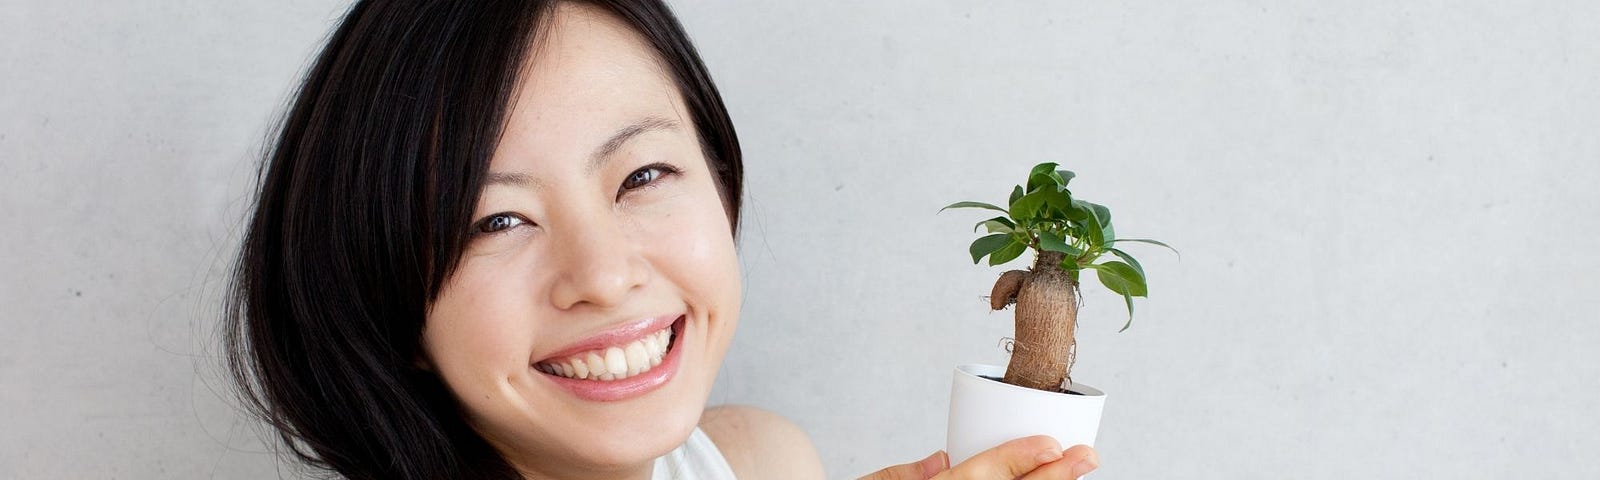 A smiling Asian woman holding a tiny house plant